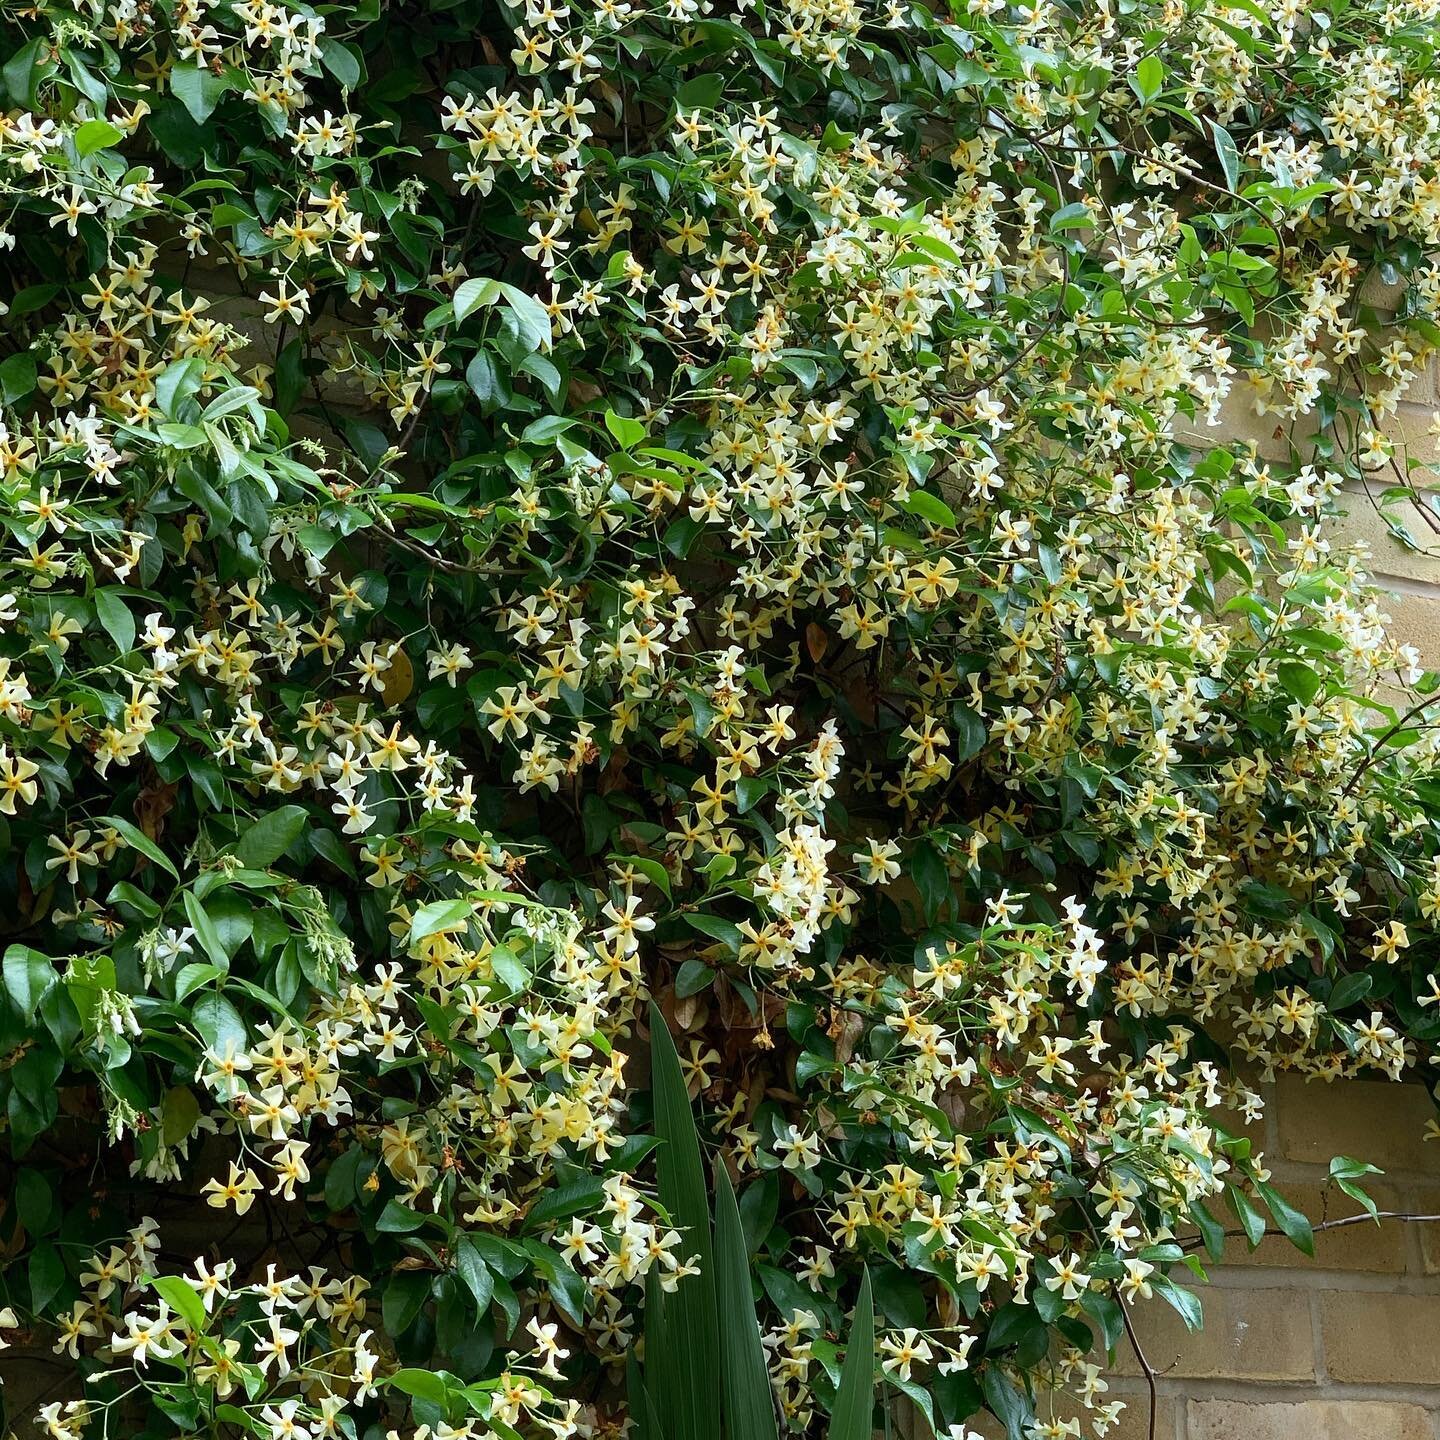 Jasmine galore in our secret garden!  It&rsquo;s been a flowering fest this season for our jasmine.  Summer is here and drinks in our upgraded garden is just the thing to get into in the summer mood.  A little hidden haven in busy Brixton.

Come join